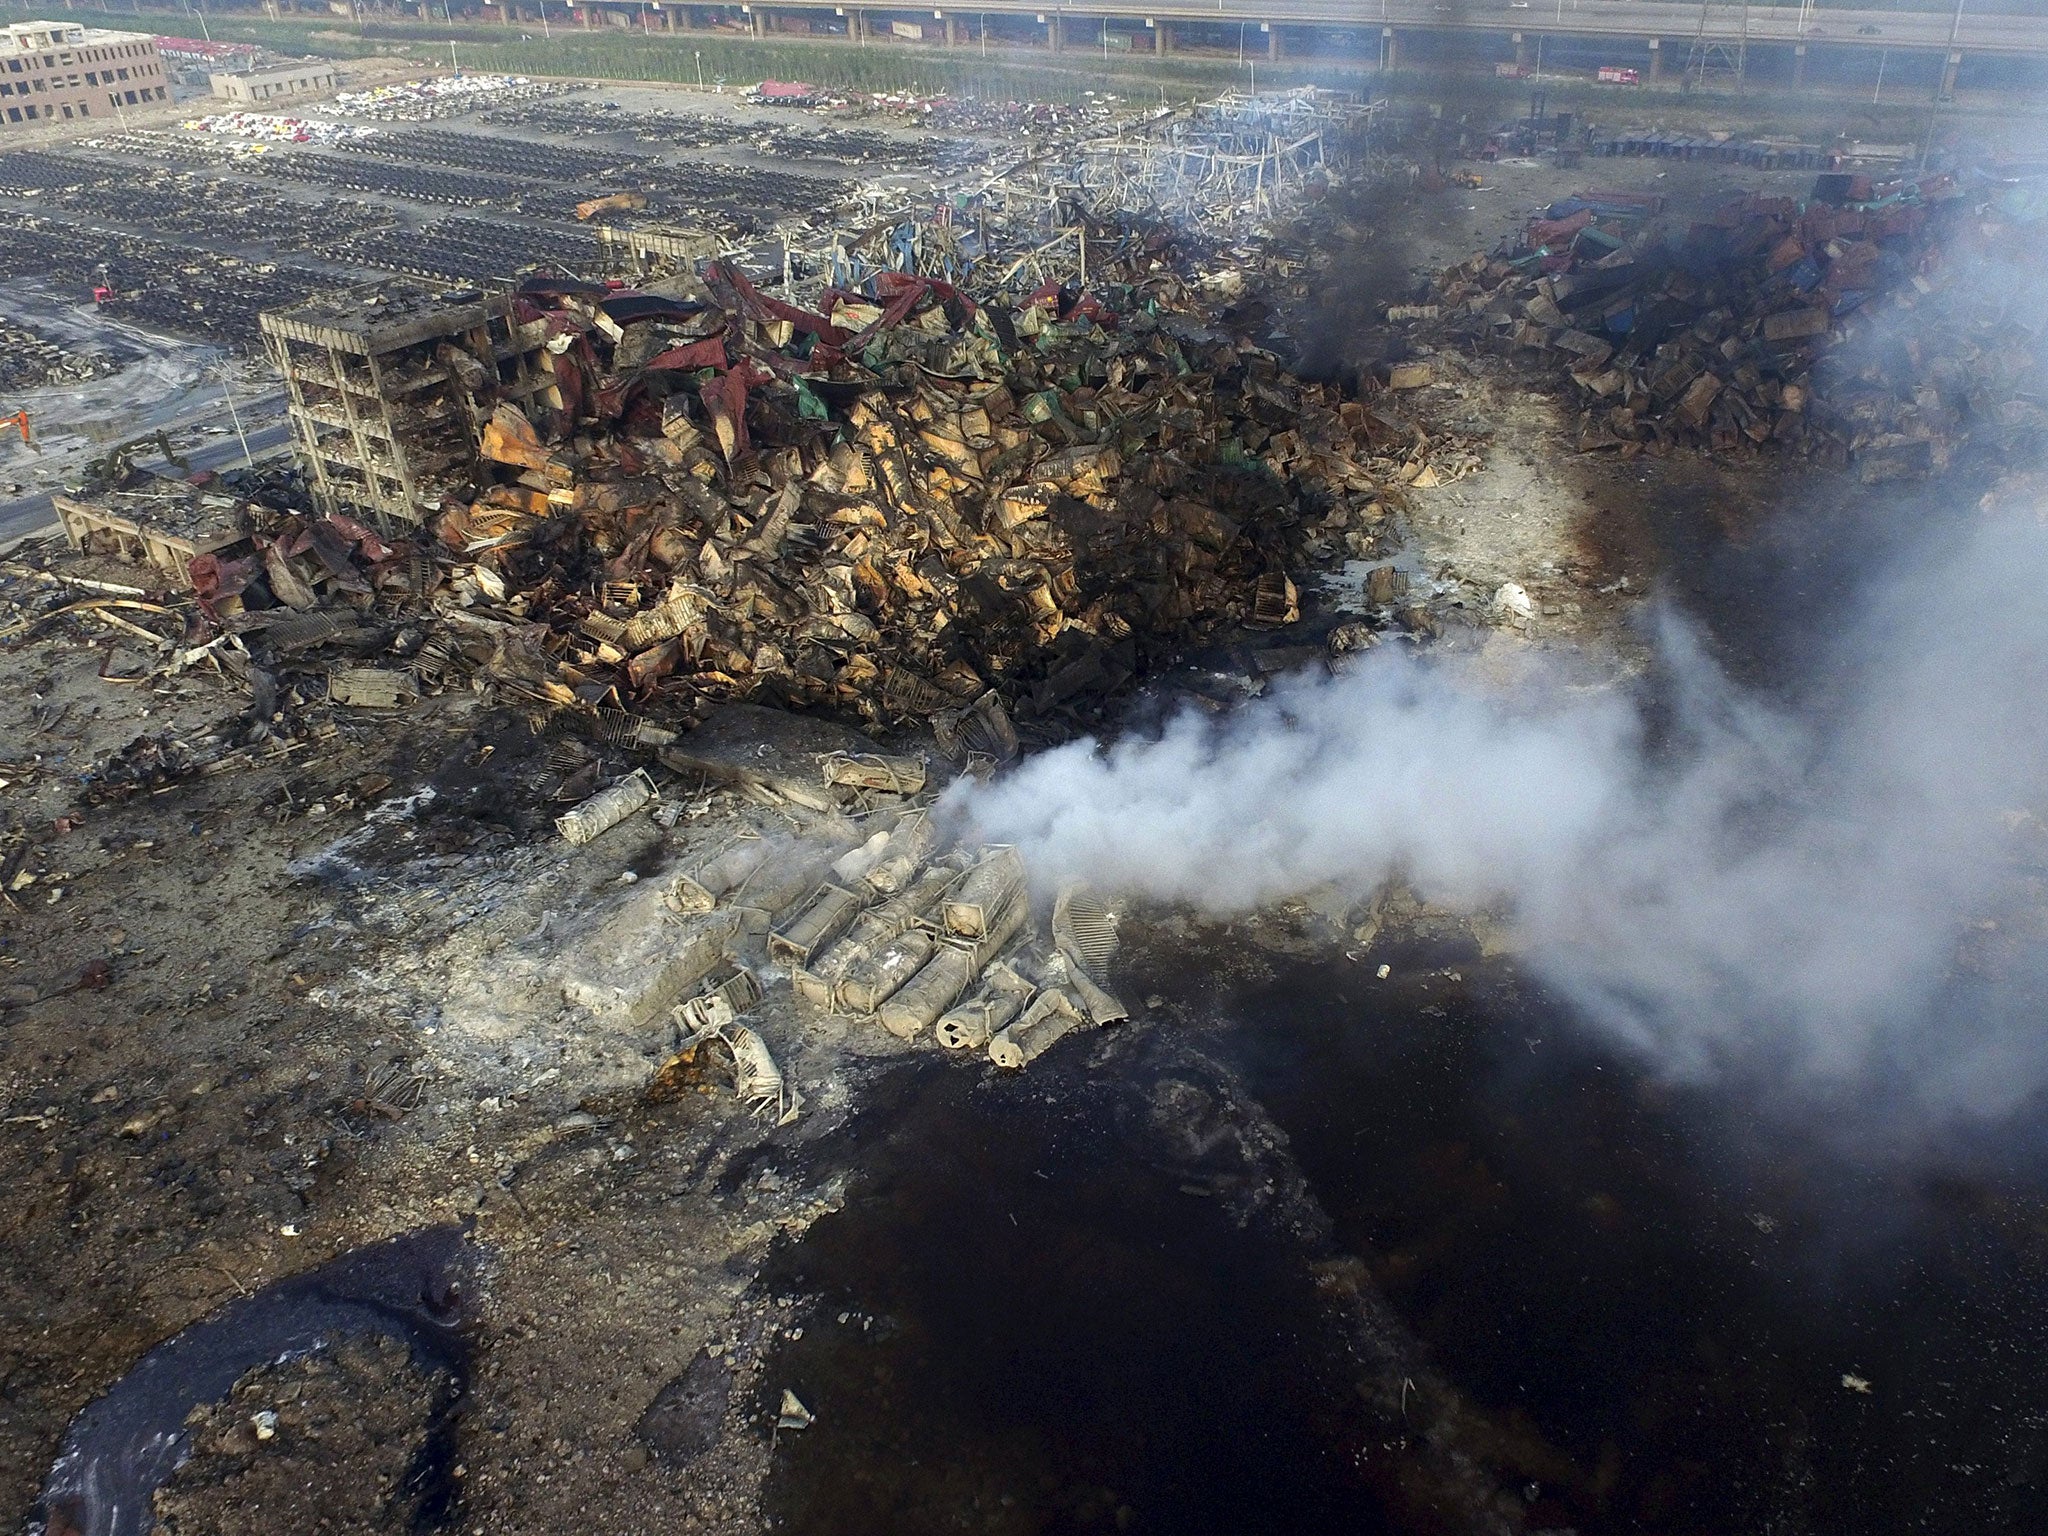 An aerial picture shows smoke rising from the debris among shipping containers at the site of the explosions at Binhai new district in Tianjin, China